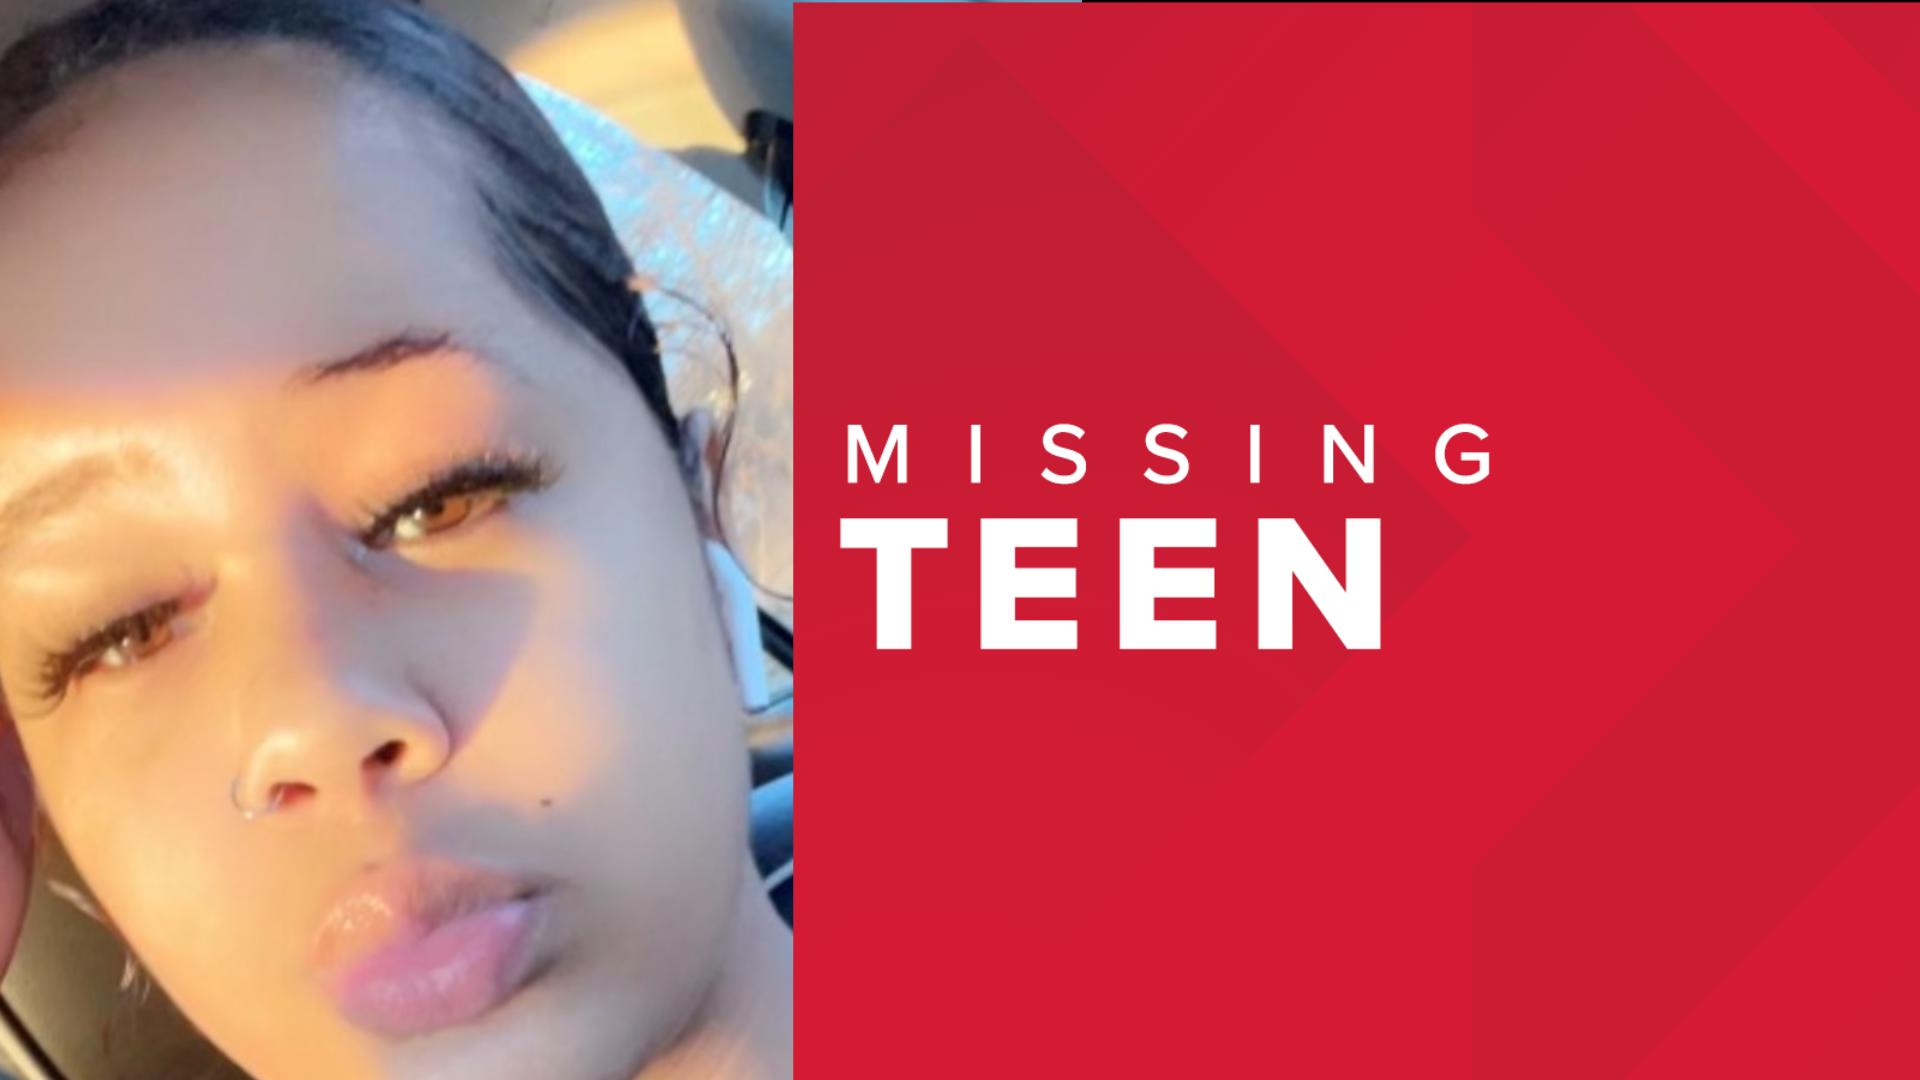 The 13-year-old was last seen getting into a dark-colored car on Main Street in Saco near Aroma Joe's around 10 p.m. Sunday, police said.